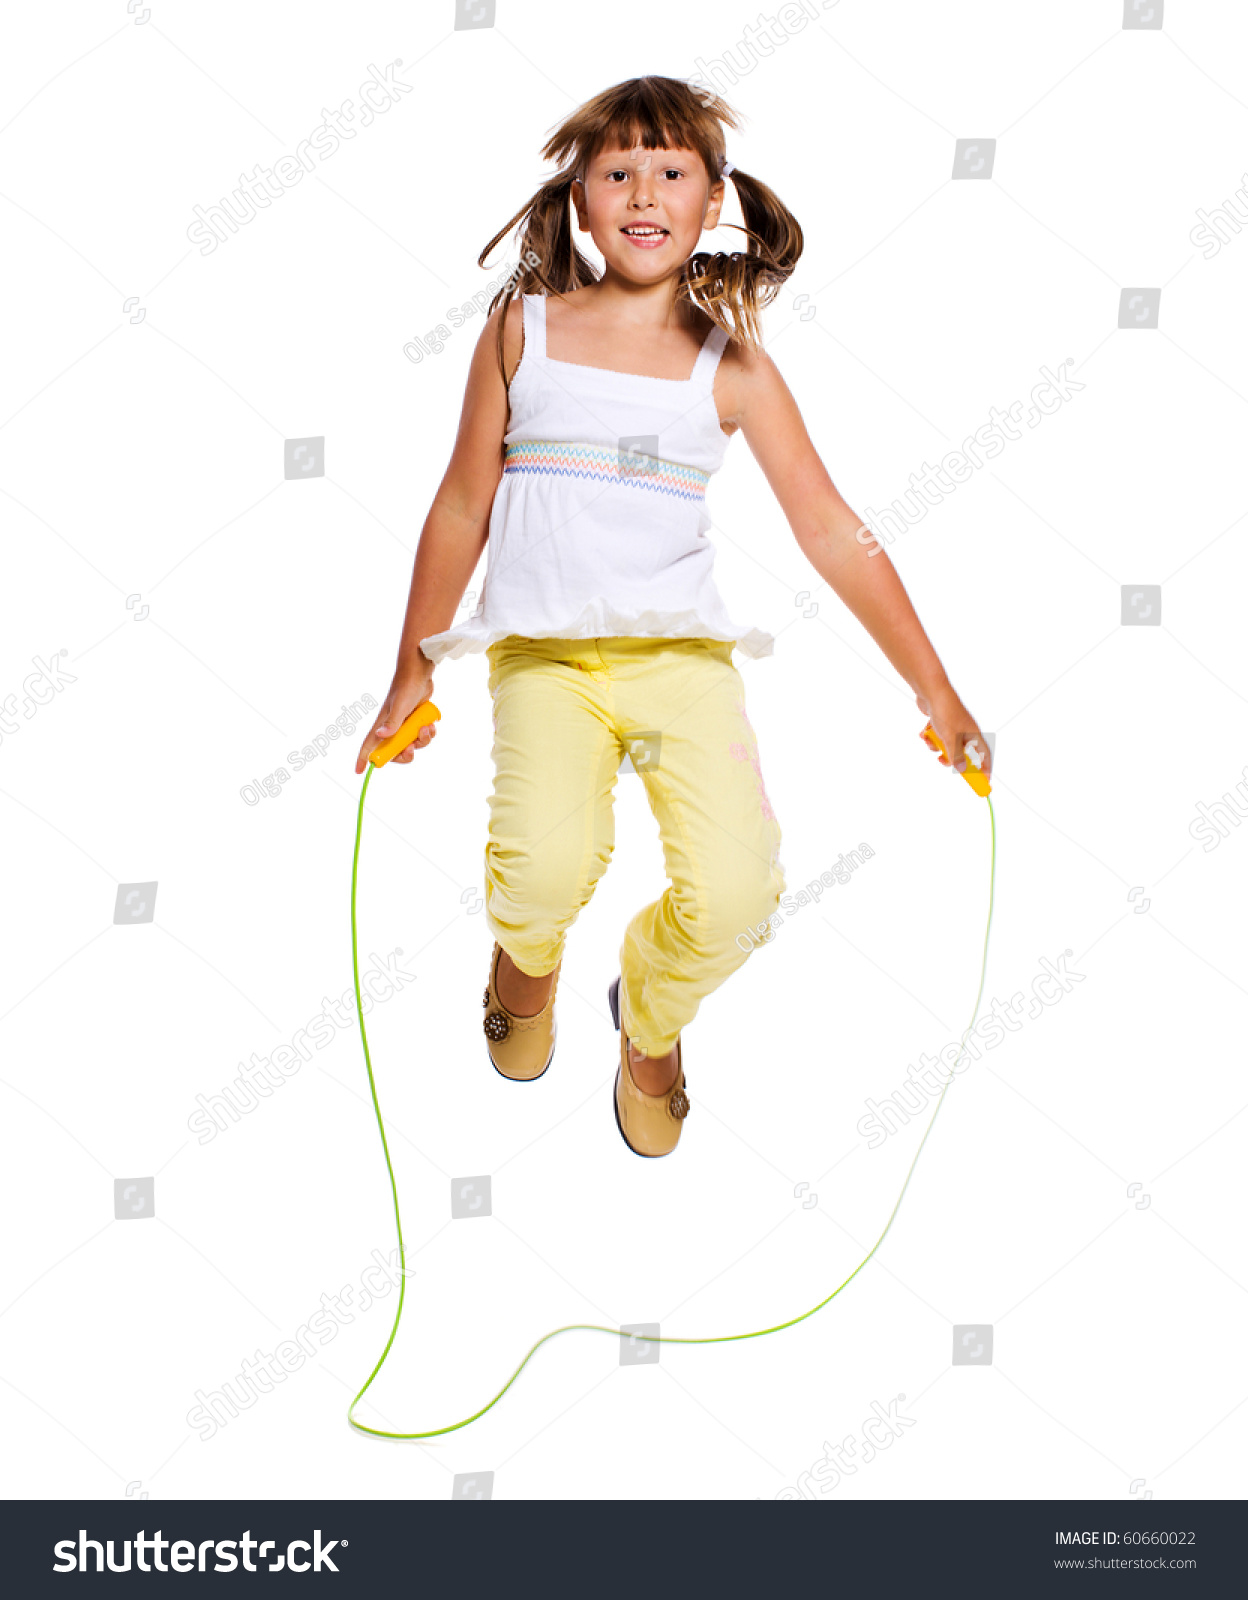 Seven Years Girl Jumping Skipping Rope Stock Photo (Royalty Free ...